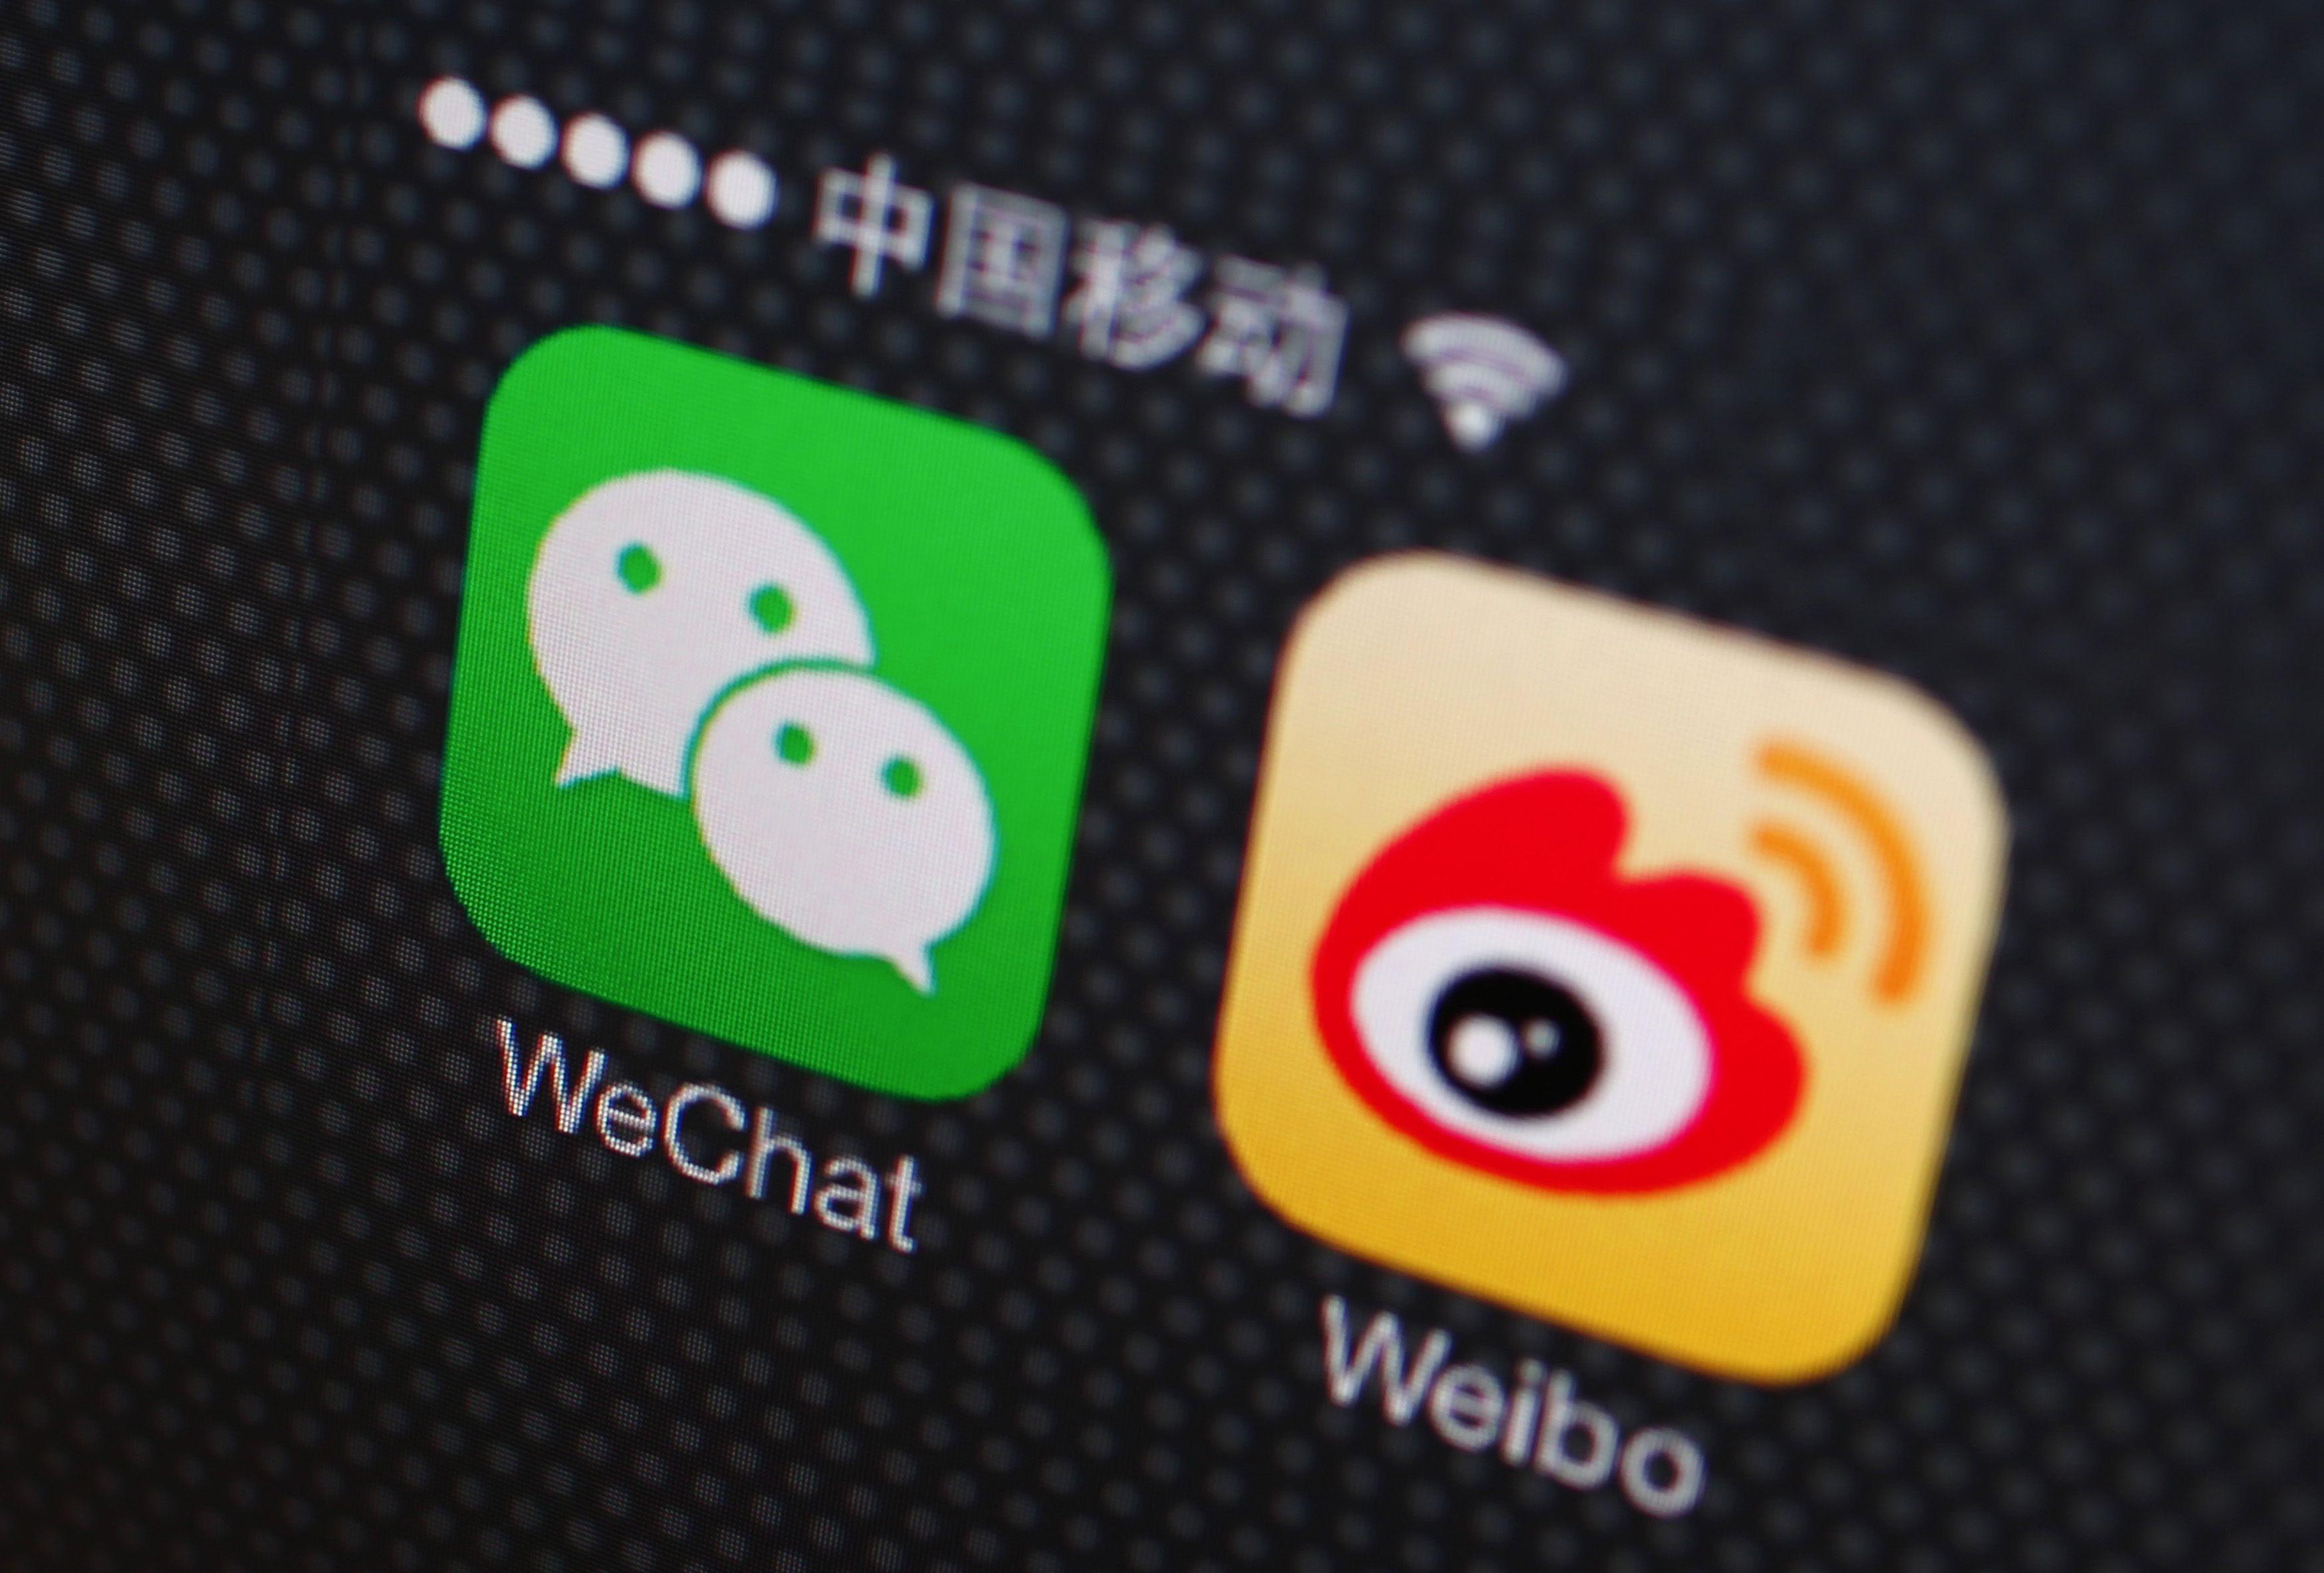 Weibo App Logo - China Investigating Tencent, Baidu and Weibo Over Cyber Laws | Fortune